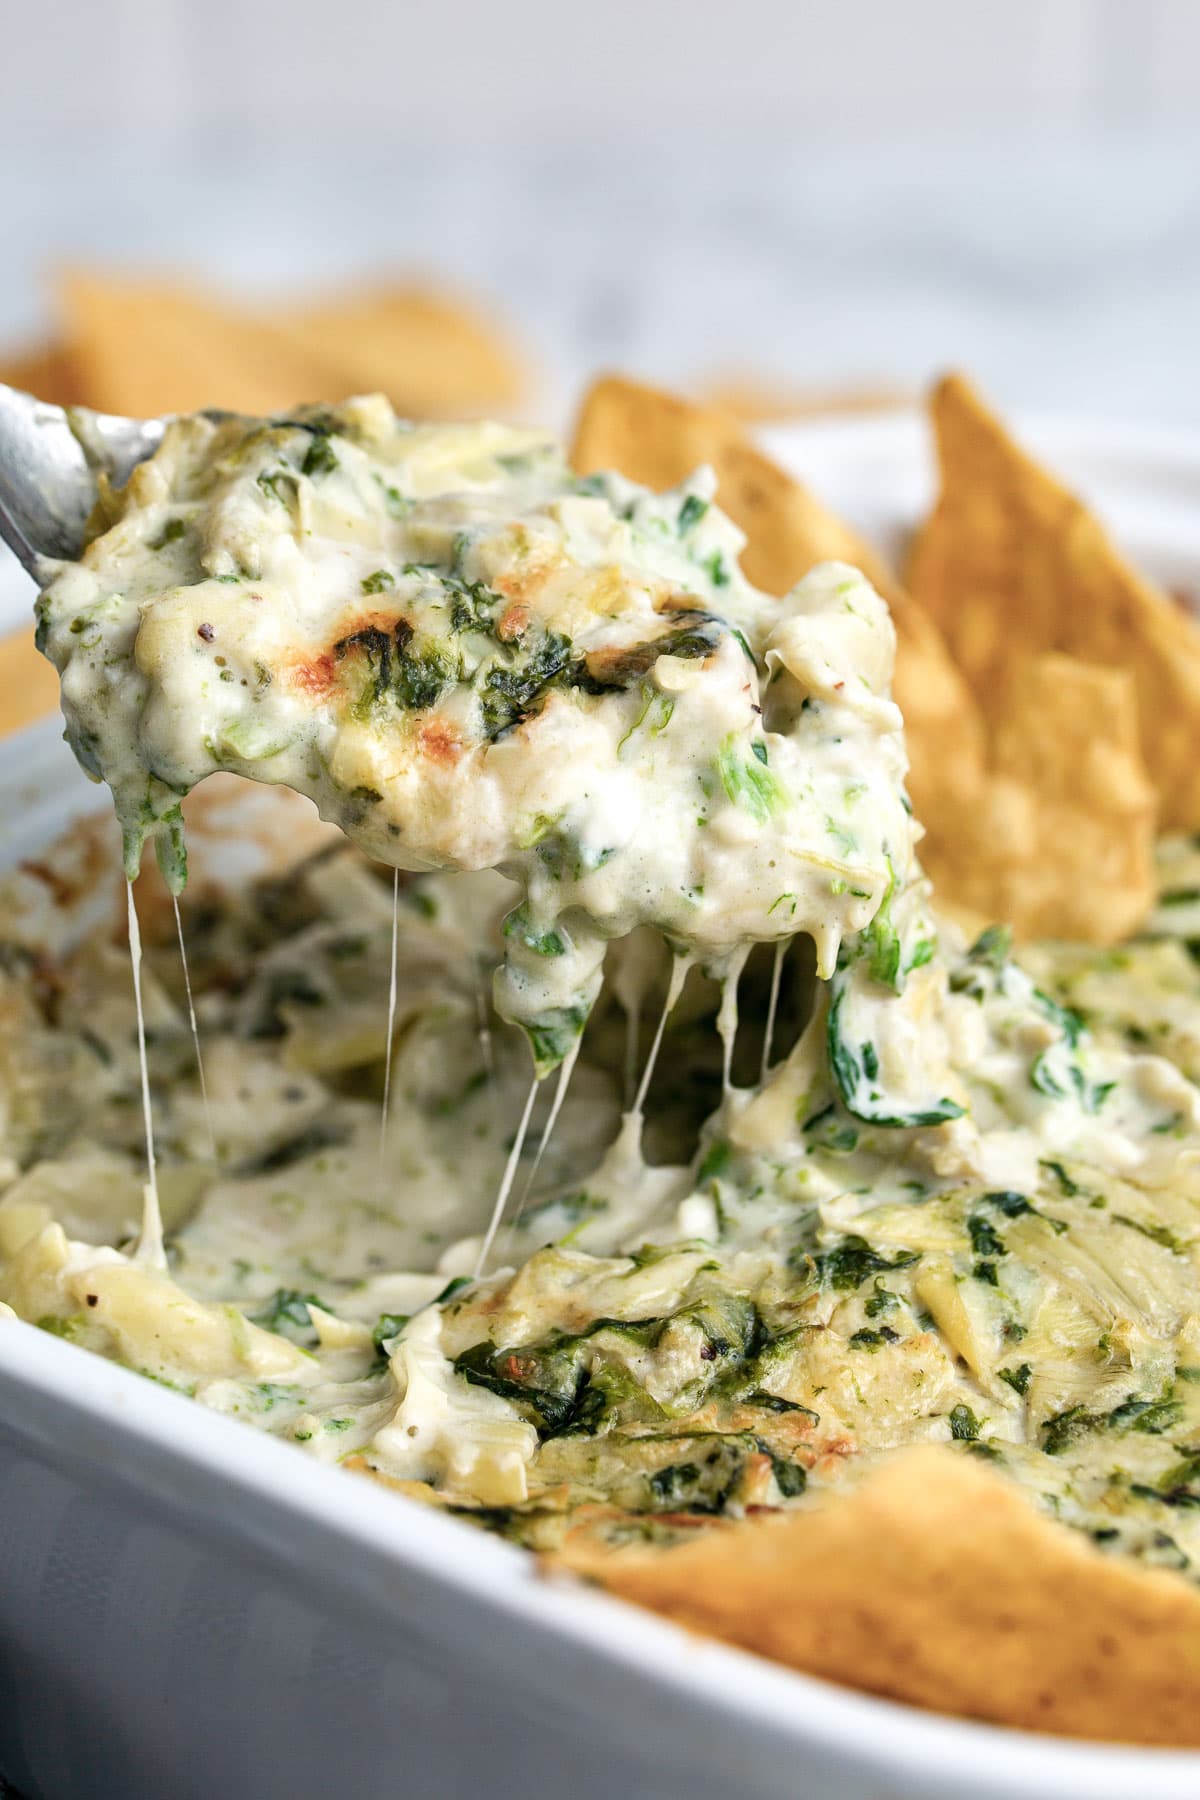 Lots of cheese strings from a hearty spoonful of spinach and artichoke dip lifted from the baking dish.